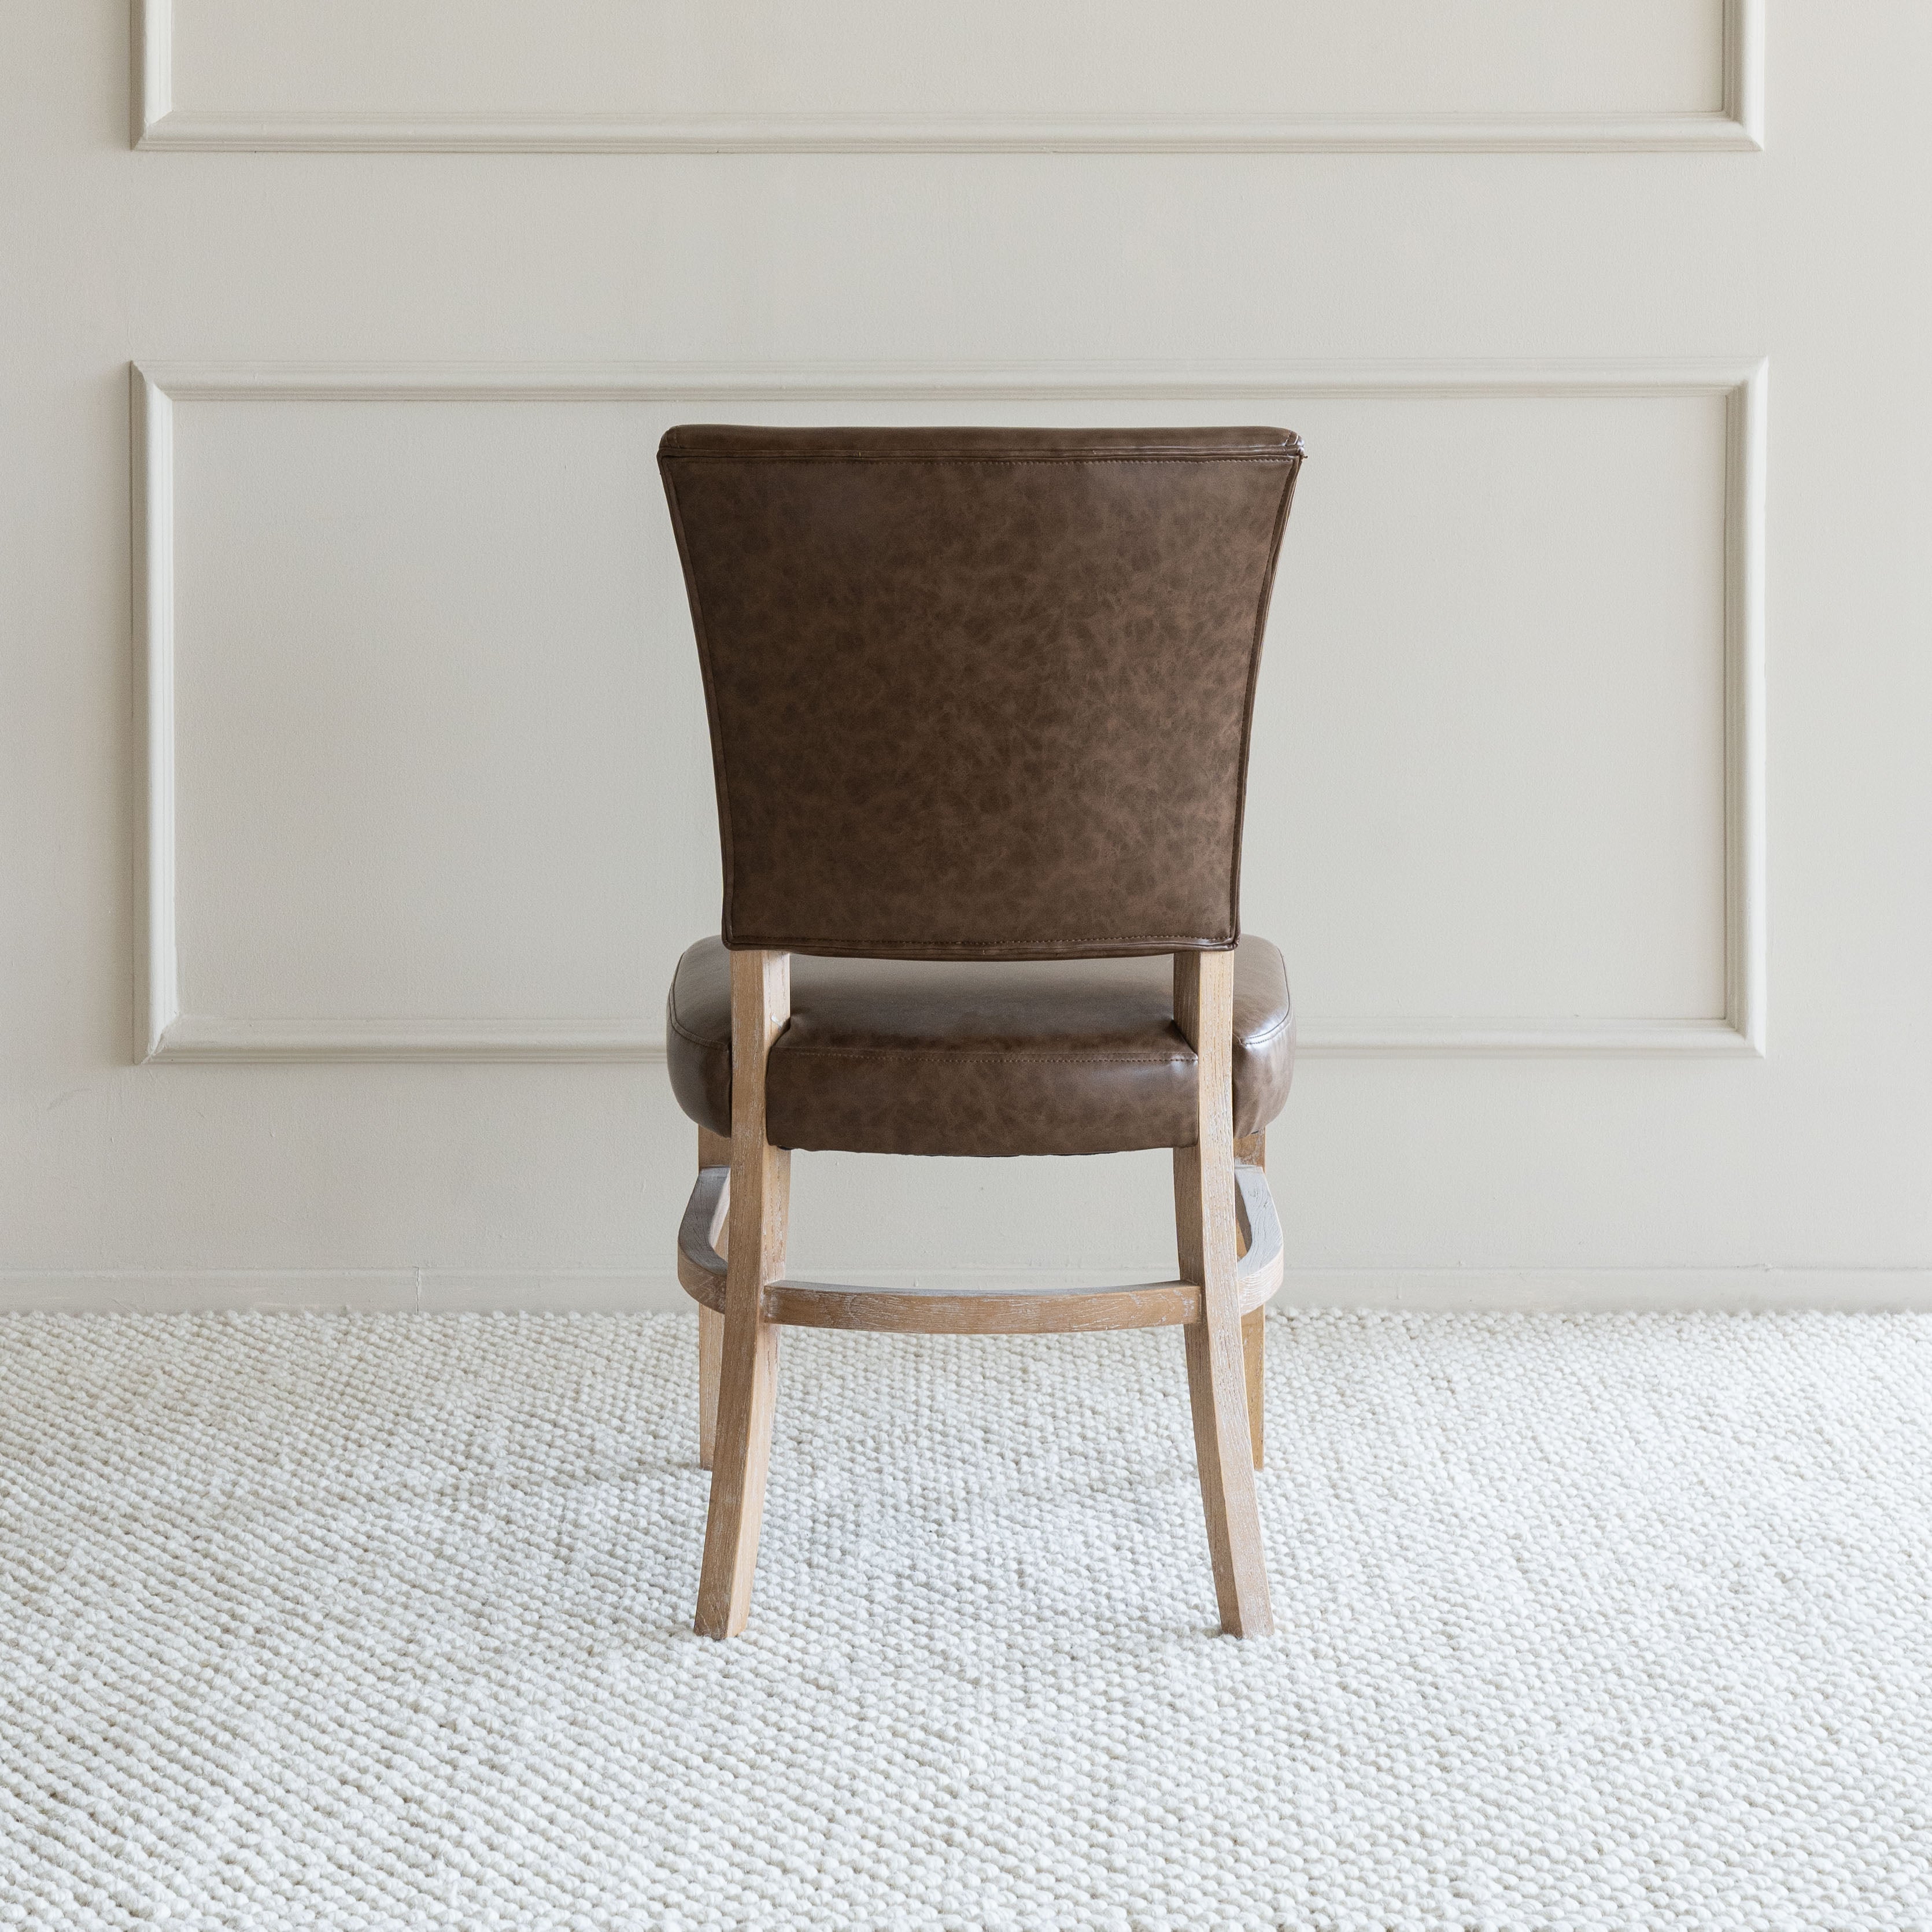 Lana Chair (LJ1041) - Wood and Steel Furnitures